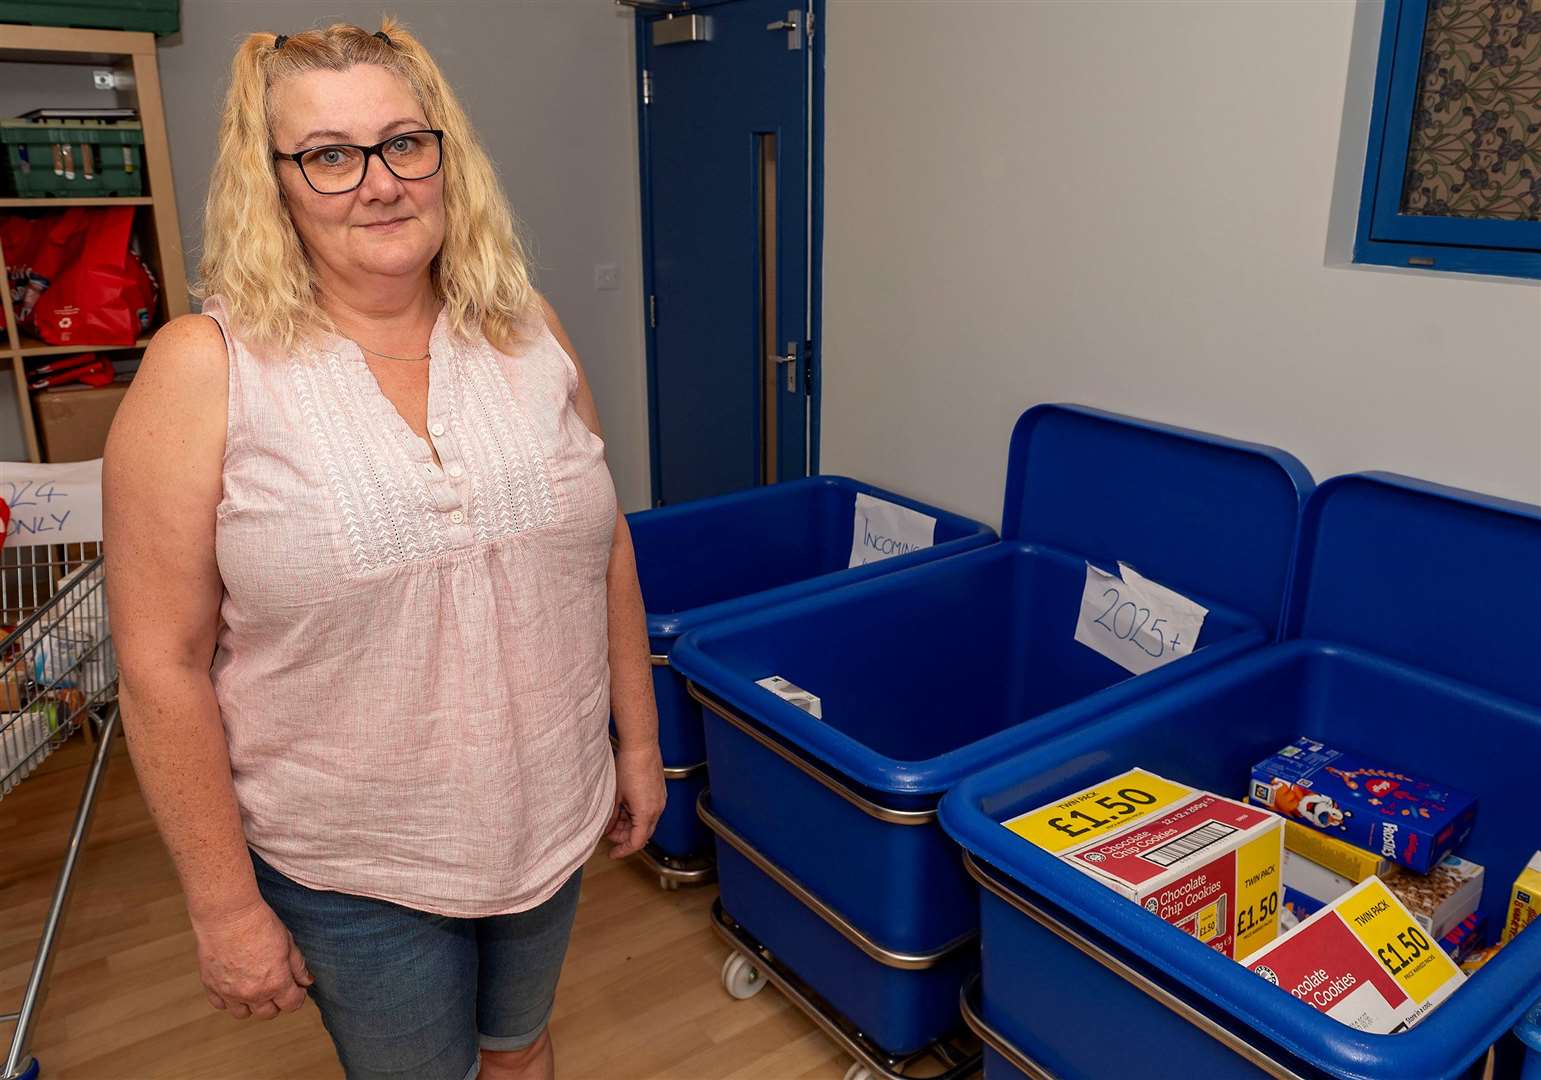 The Gatehouse charity, which runs a foodbank among its services, has also seen a rise in shoplifting at its own charity shop, said CEO Amanda Bloomfield. Picture: Mark Westley